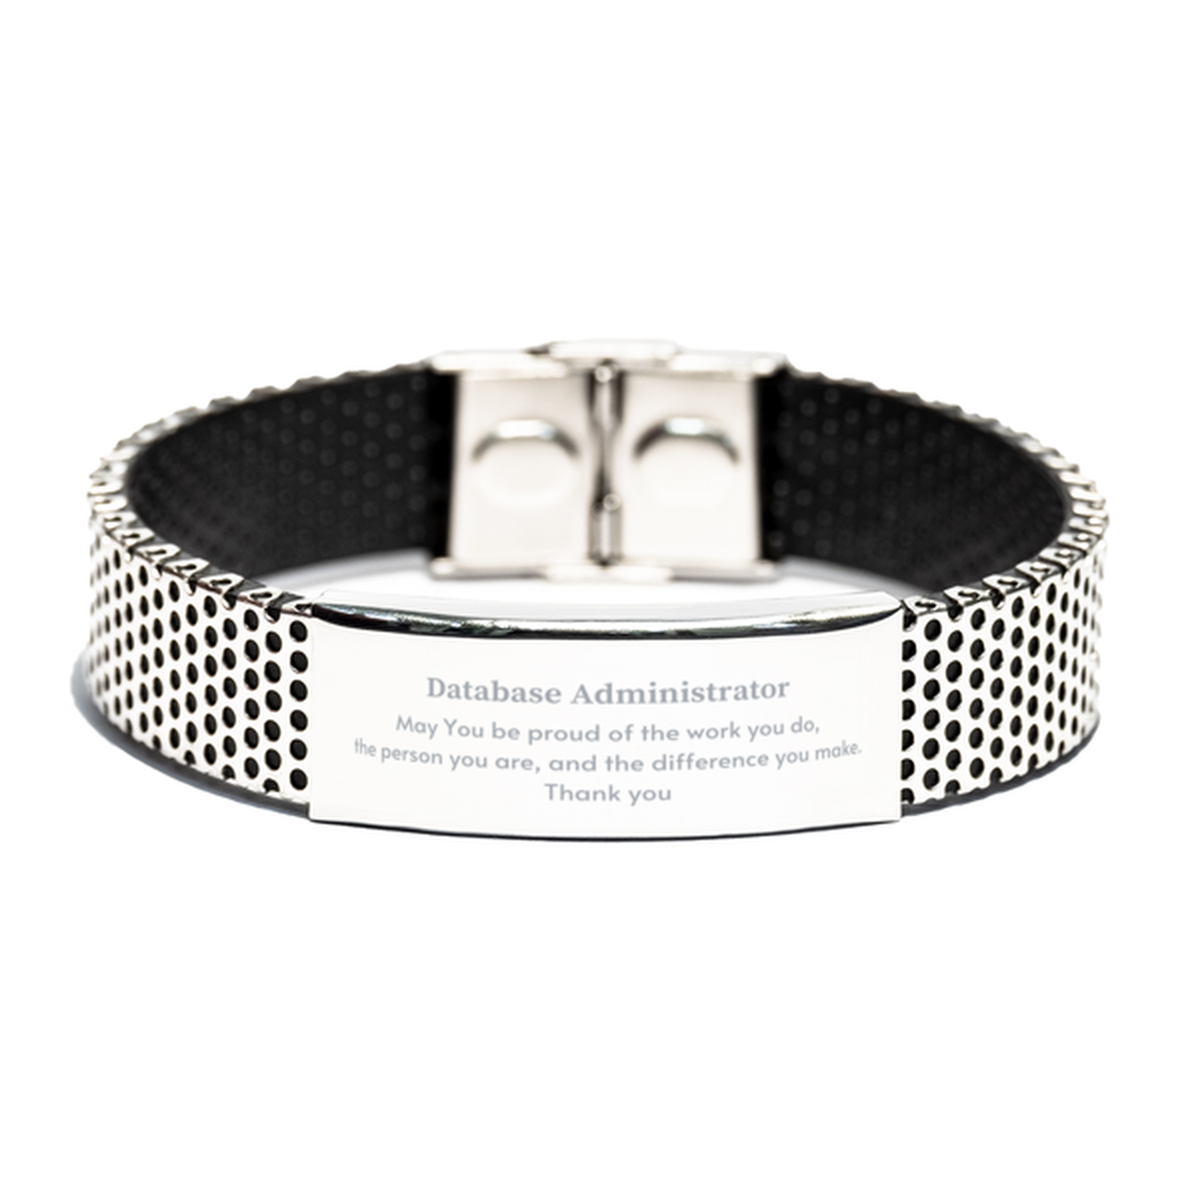 Heartwarming Stainless Steel Bracelet Retirement Coworkers Gifts for Database Administrator, Database Administrator May You be proud of the work you do, the person you are Gifts for Boss Men Women Friends